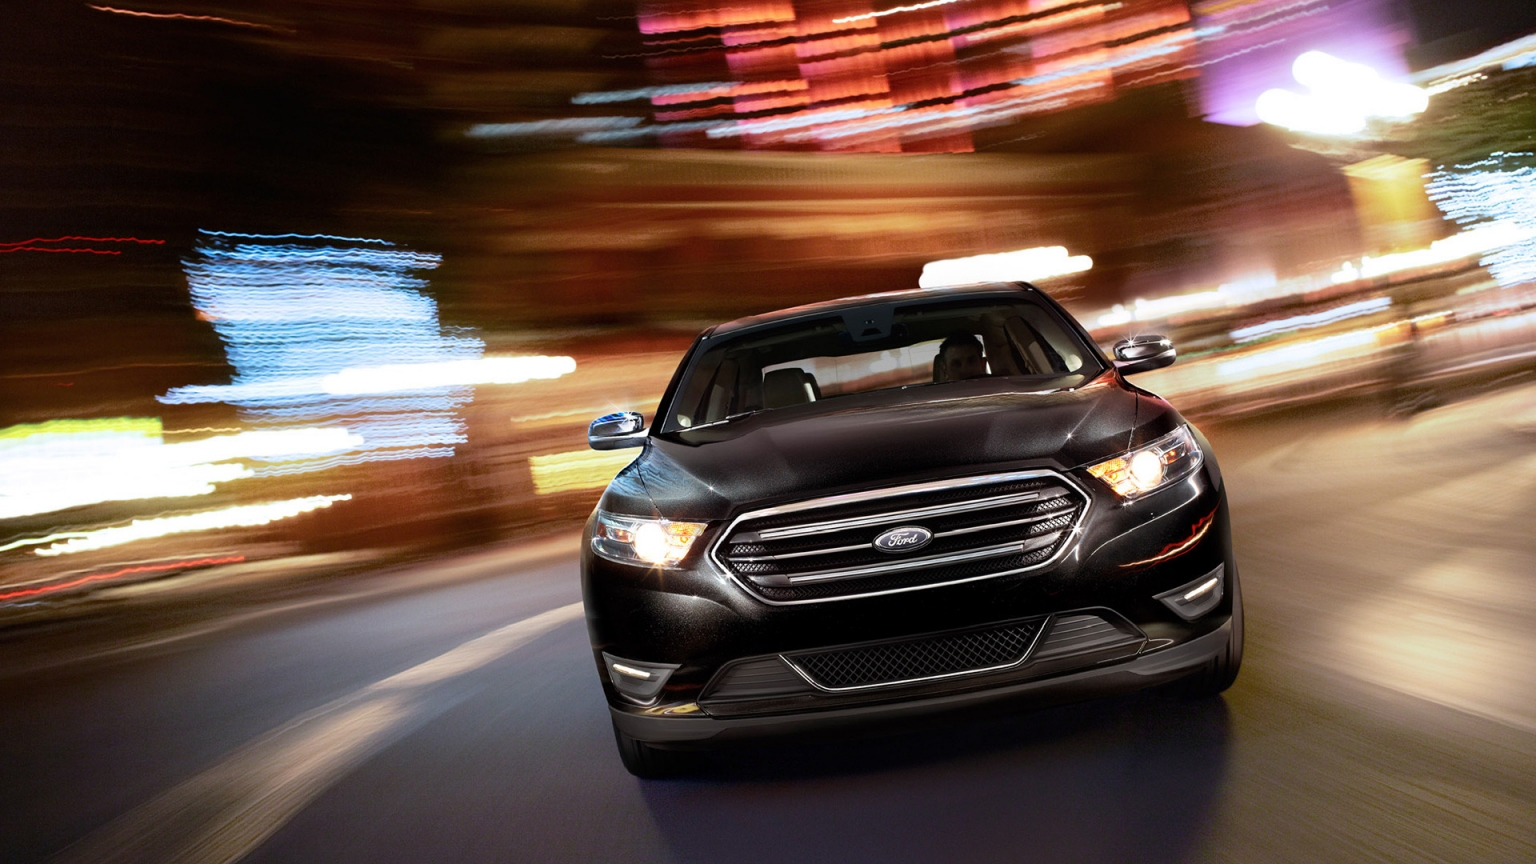 2013 Ford Taurus Limited for 1536 x 864 HDTV resolution